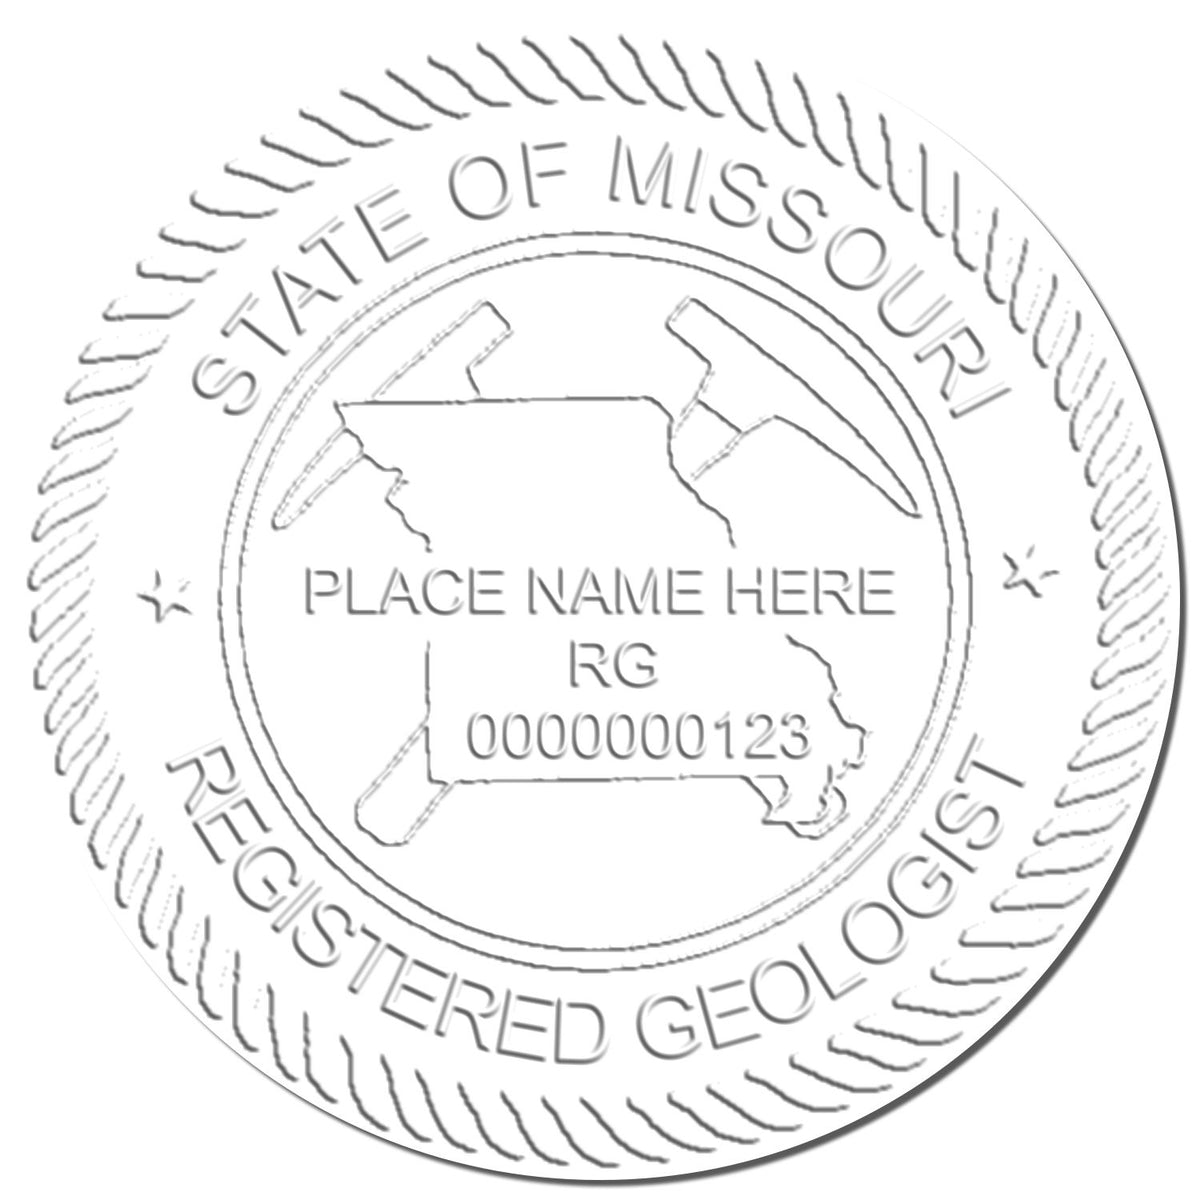 The Missouri Geologist Desk Seal stamp impression comes to life with a crisp, detailed image stamped on paper - showcasing true professional quality.